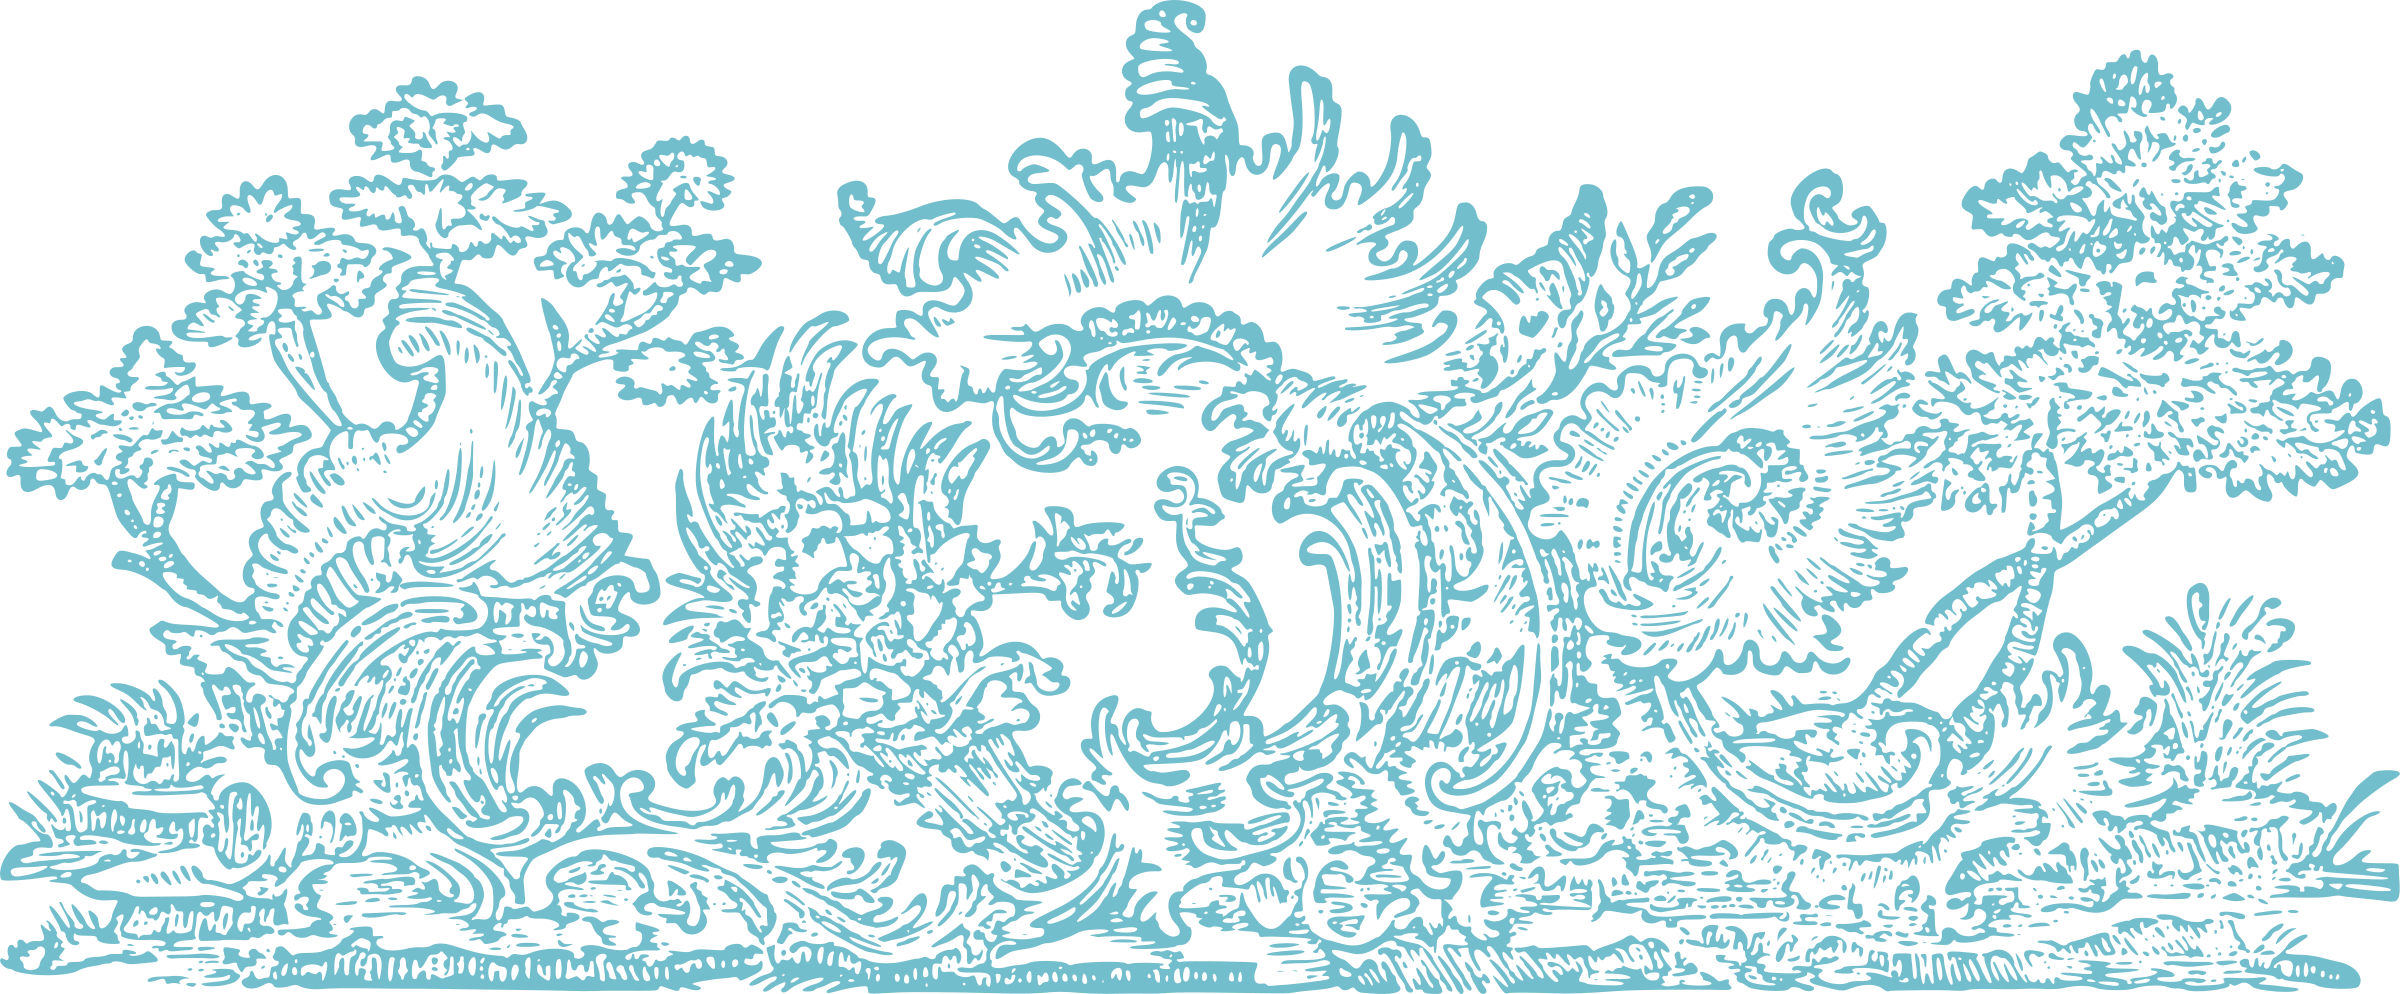 Waves clipart flood. Ornamental and trees big